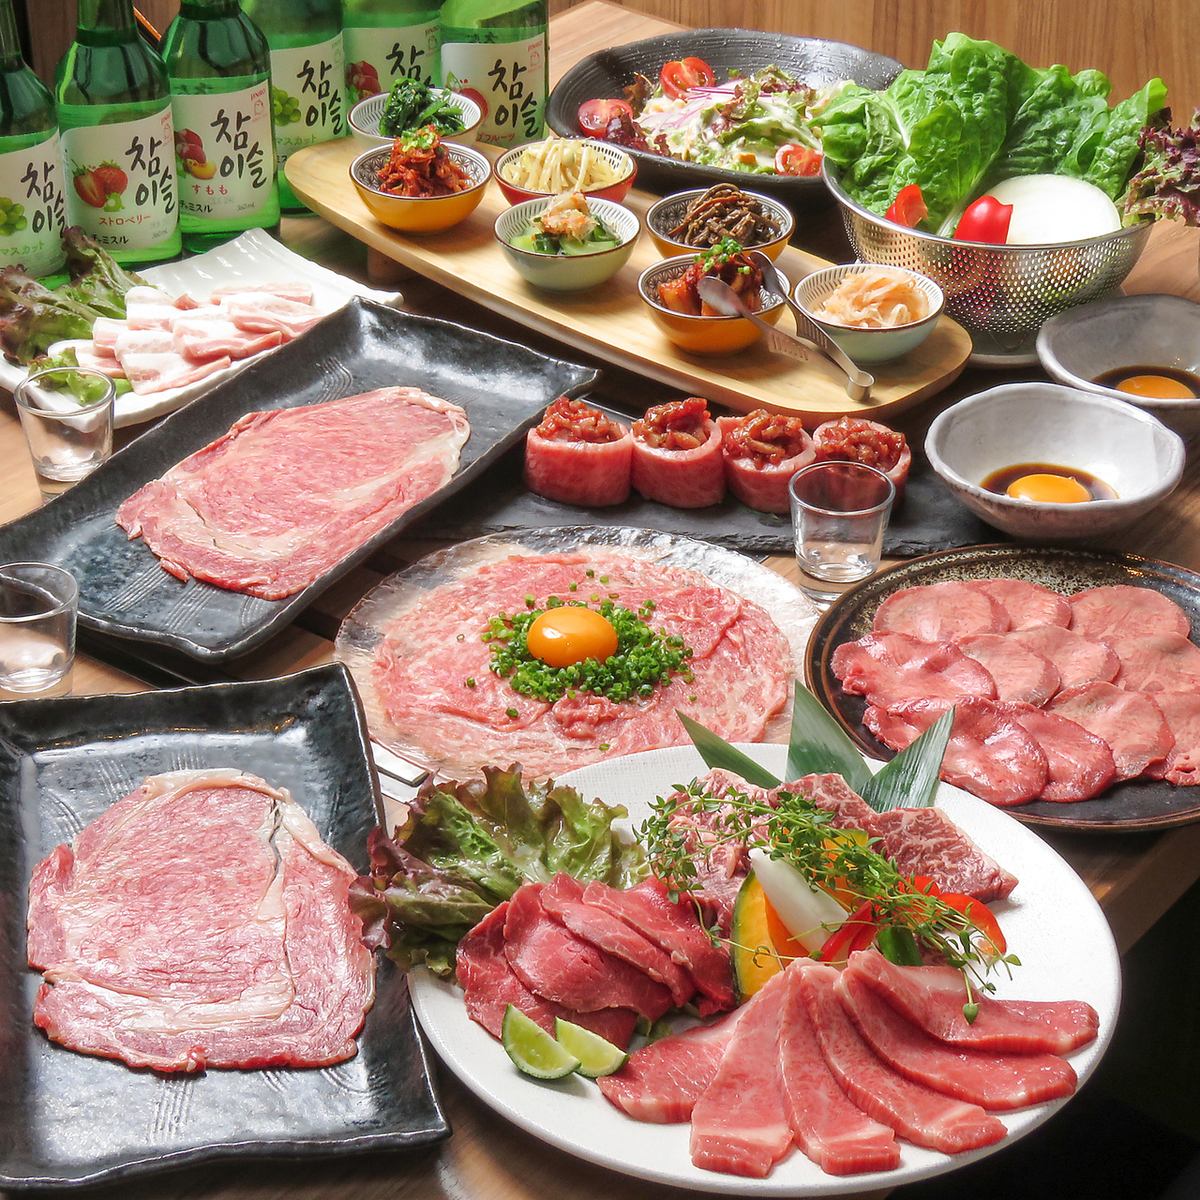 Unusual all-you-can-drink course at a yakiniku restaurant♪ 1,650 yen for 2 hours including draft beer!